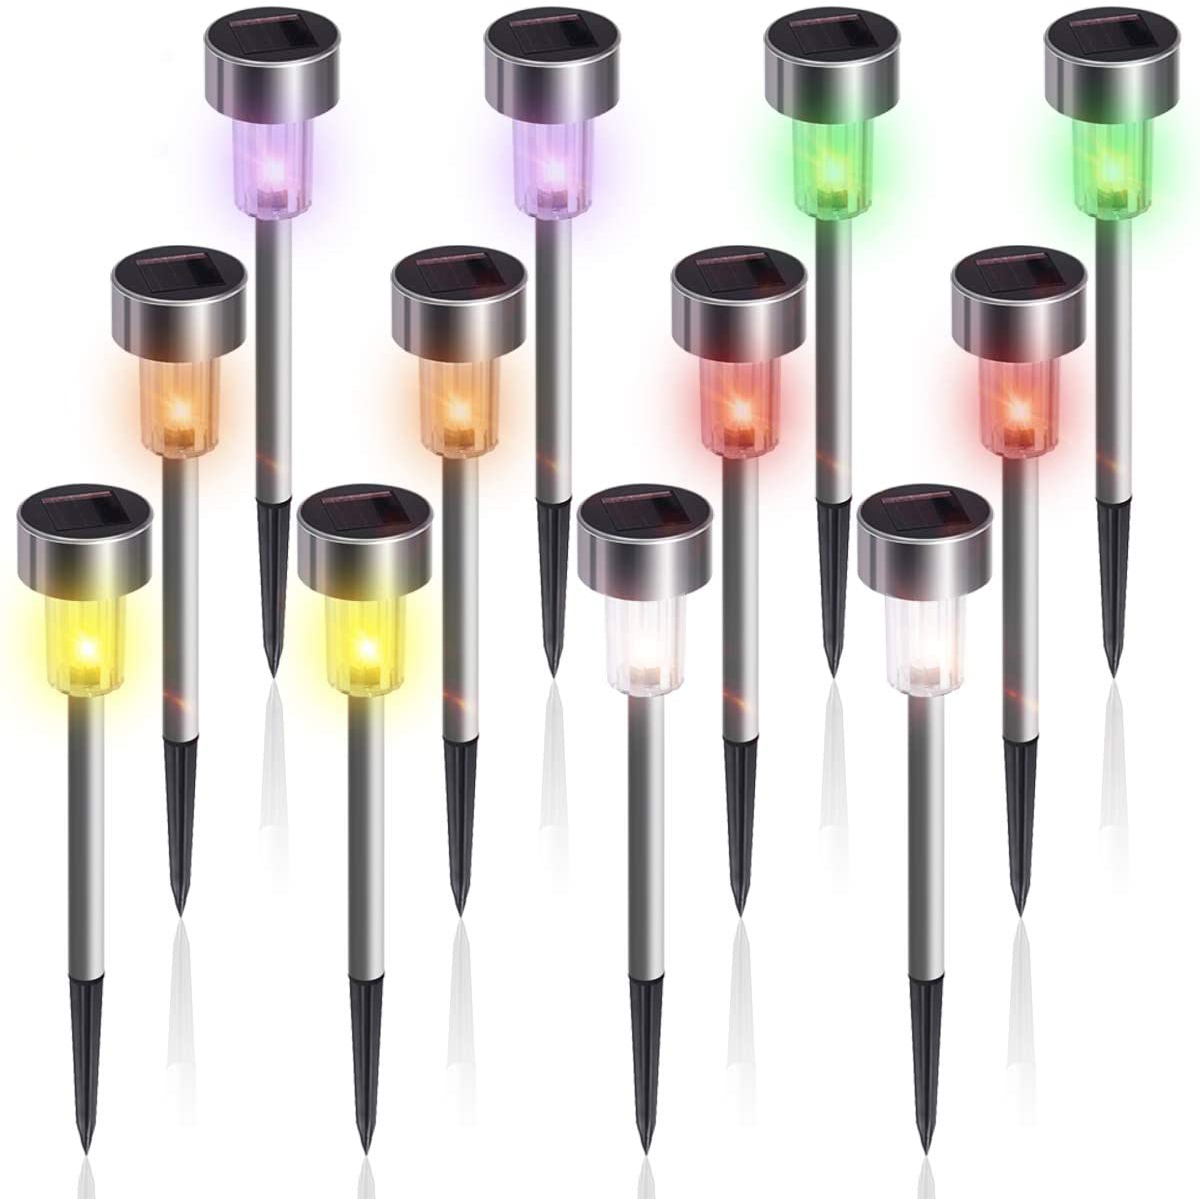 GIGALUMI Solar Lights, Outdoor LED Path Light Stainless Steel-12 Pack (Multi-Color) - image 1 of 6